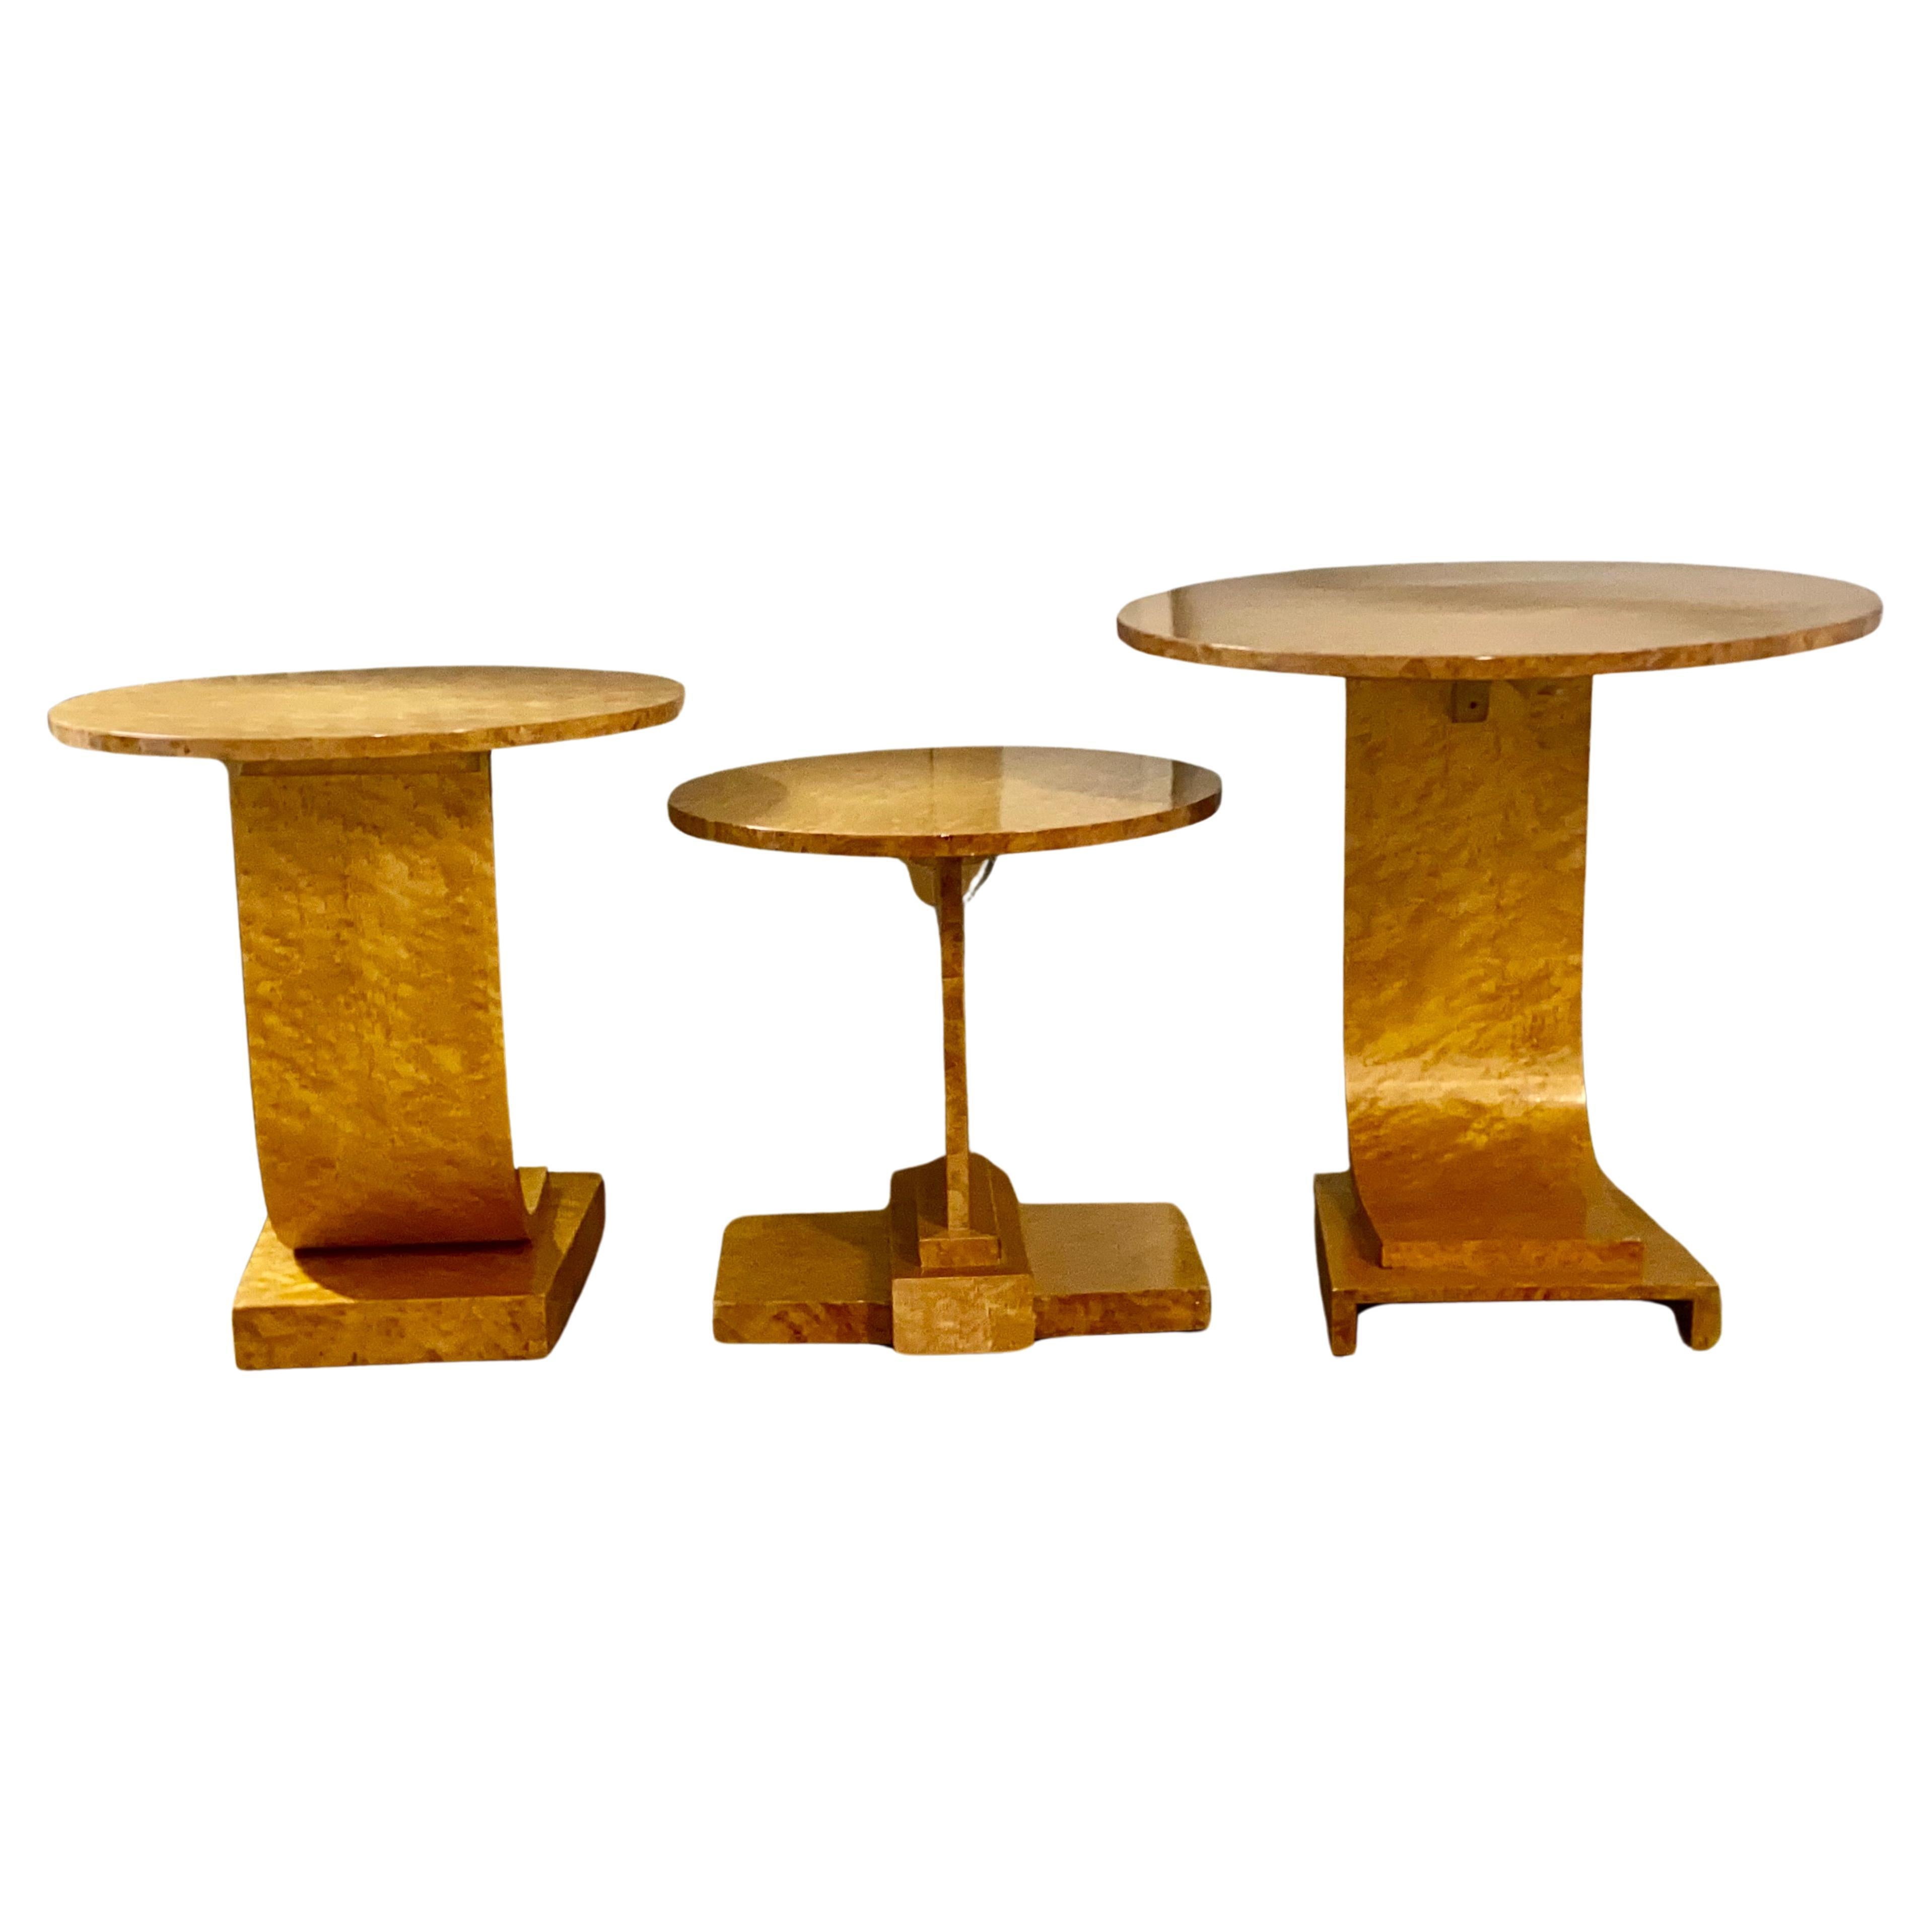 Wood A Rare Art Deco Blonde Birds Eye Maple J Nest of Tables by Epstein Circa 1930 For Sale